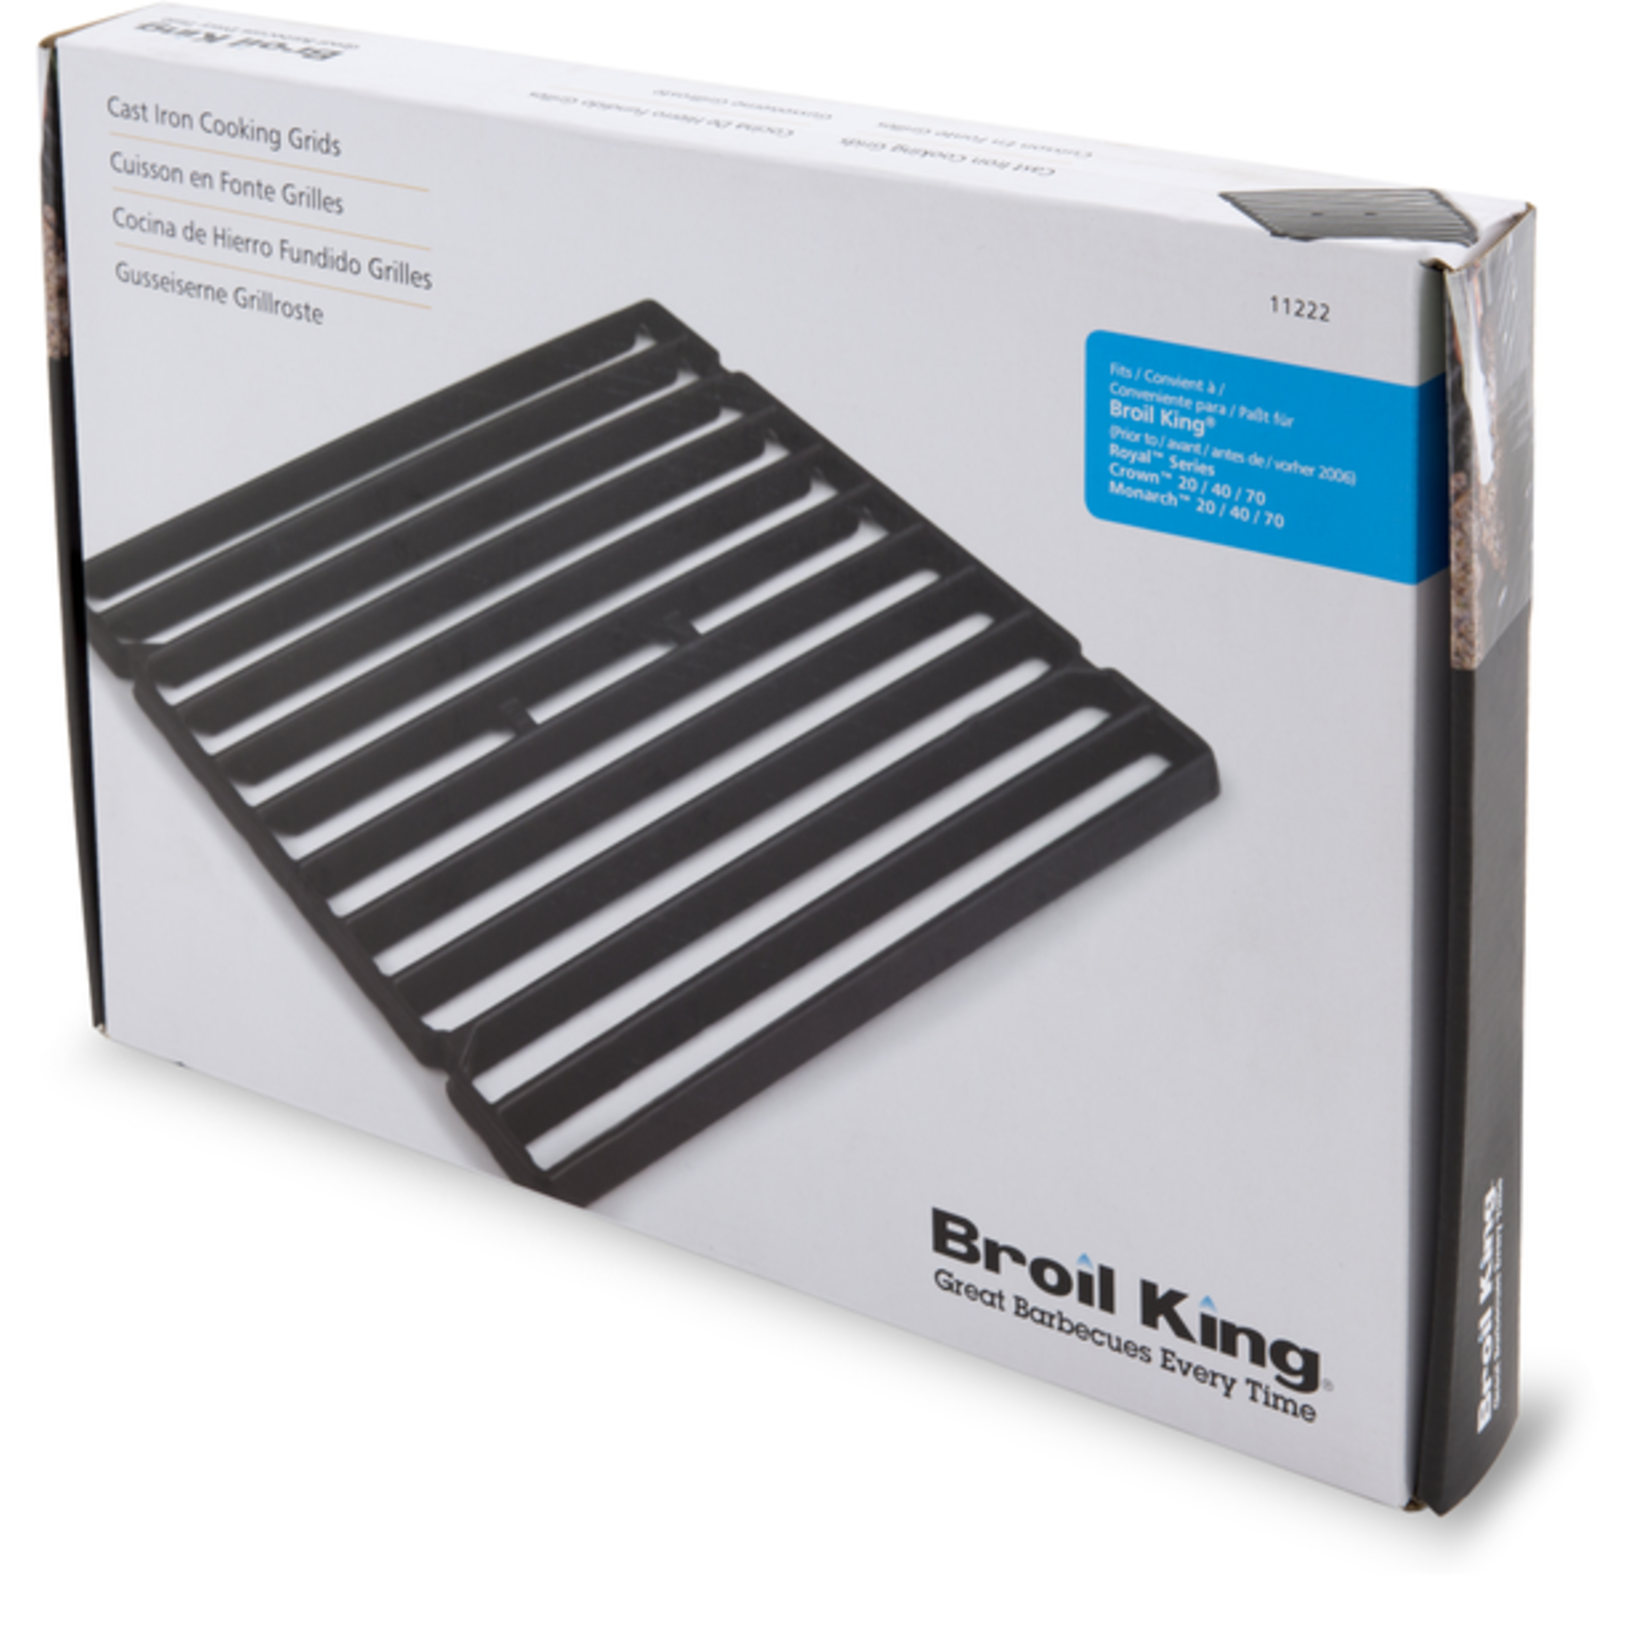 Broil King Cooking Grid - Monarch 300/Crown (T32) - Cast Iron - 2 Pieces